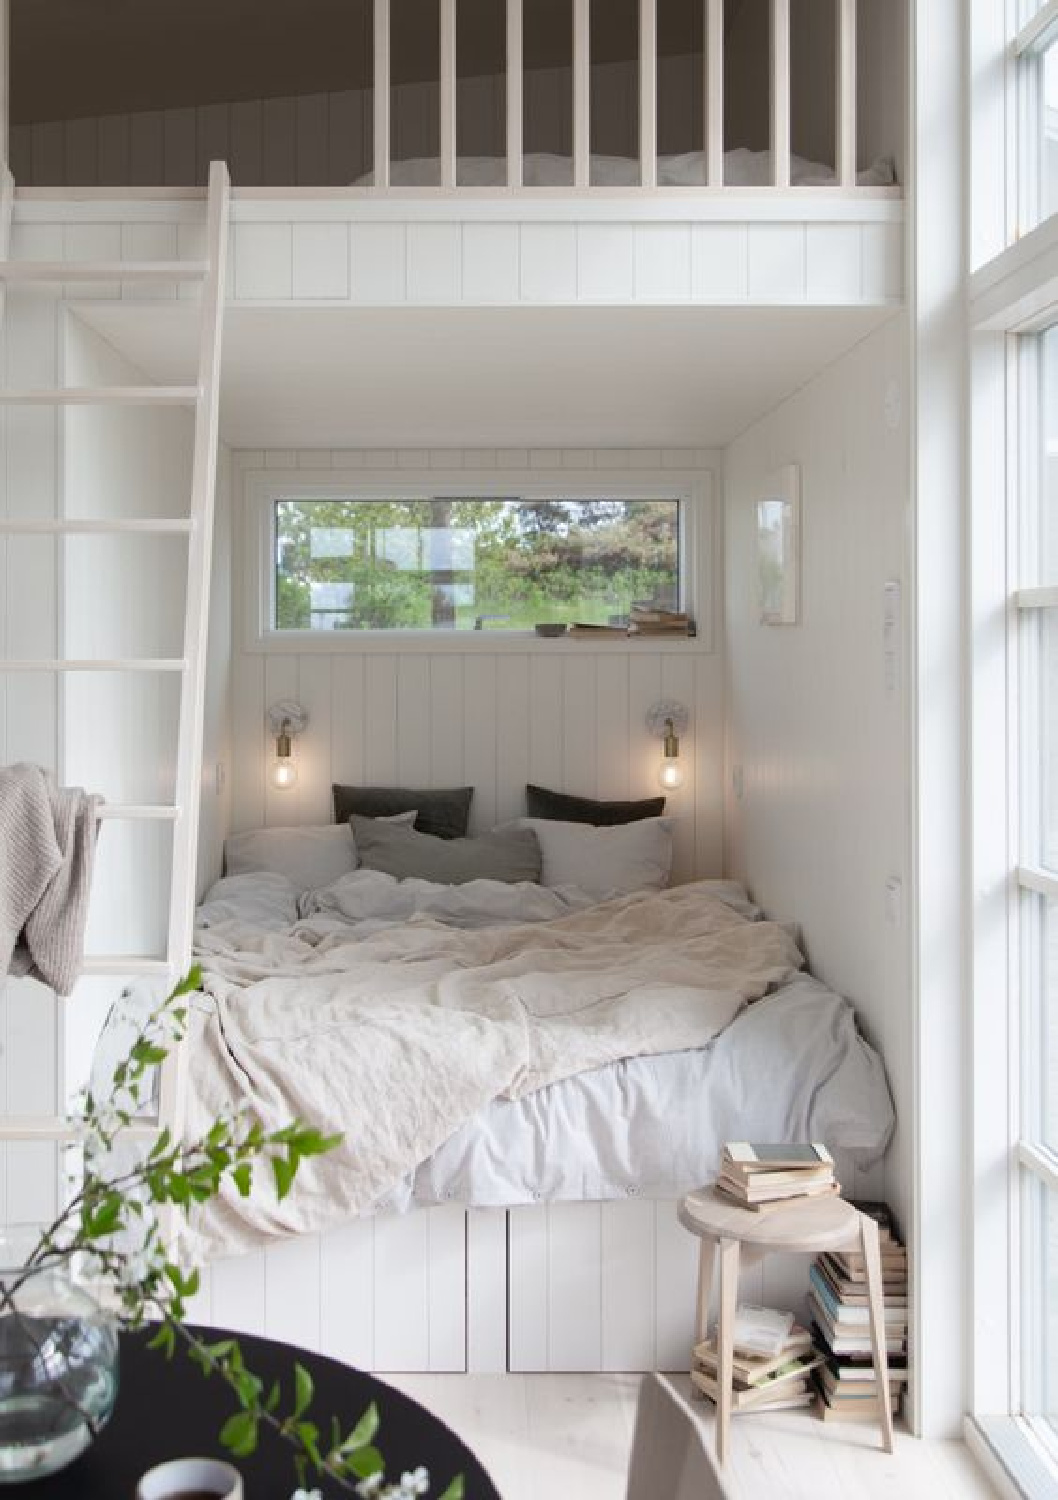 Sweet and cozy built in bunk area of a Scandi cabin with beaded board - My Scandinavian Home. #cozybedrooms #cozycabins #europeancottage #cozybedrooms #bunkrooms